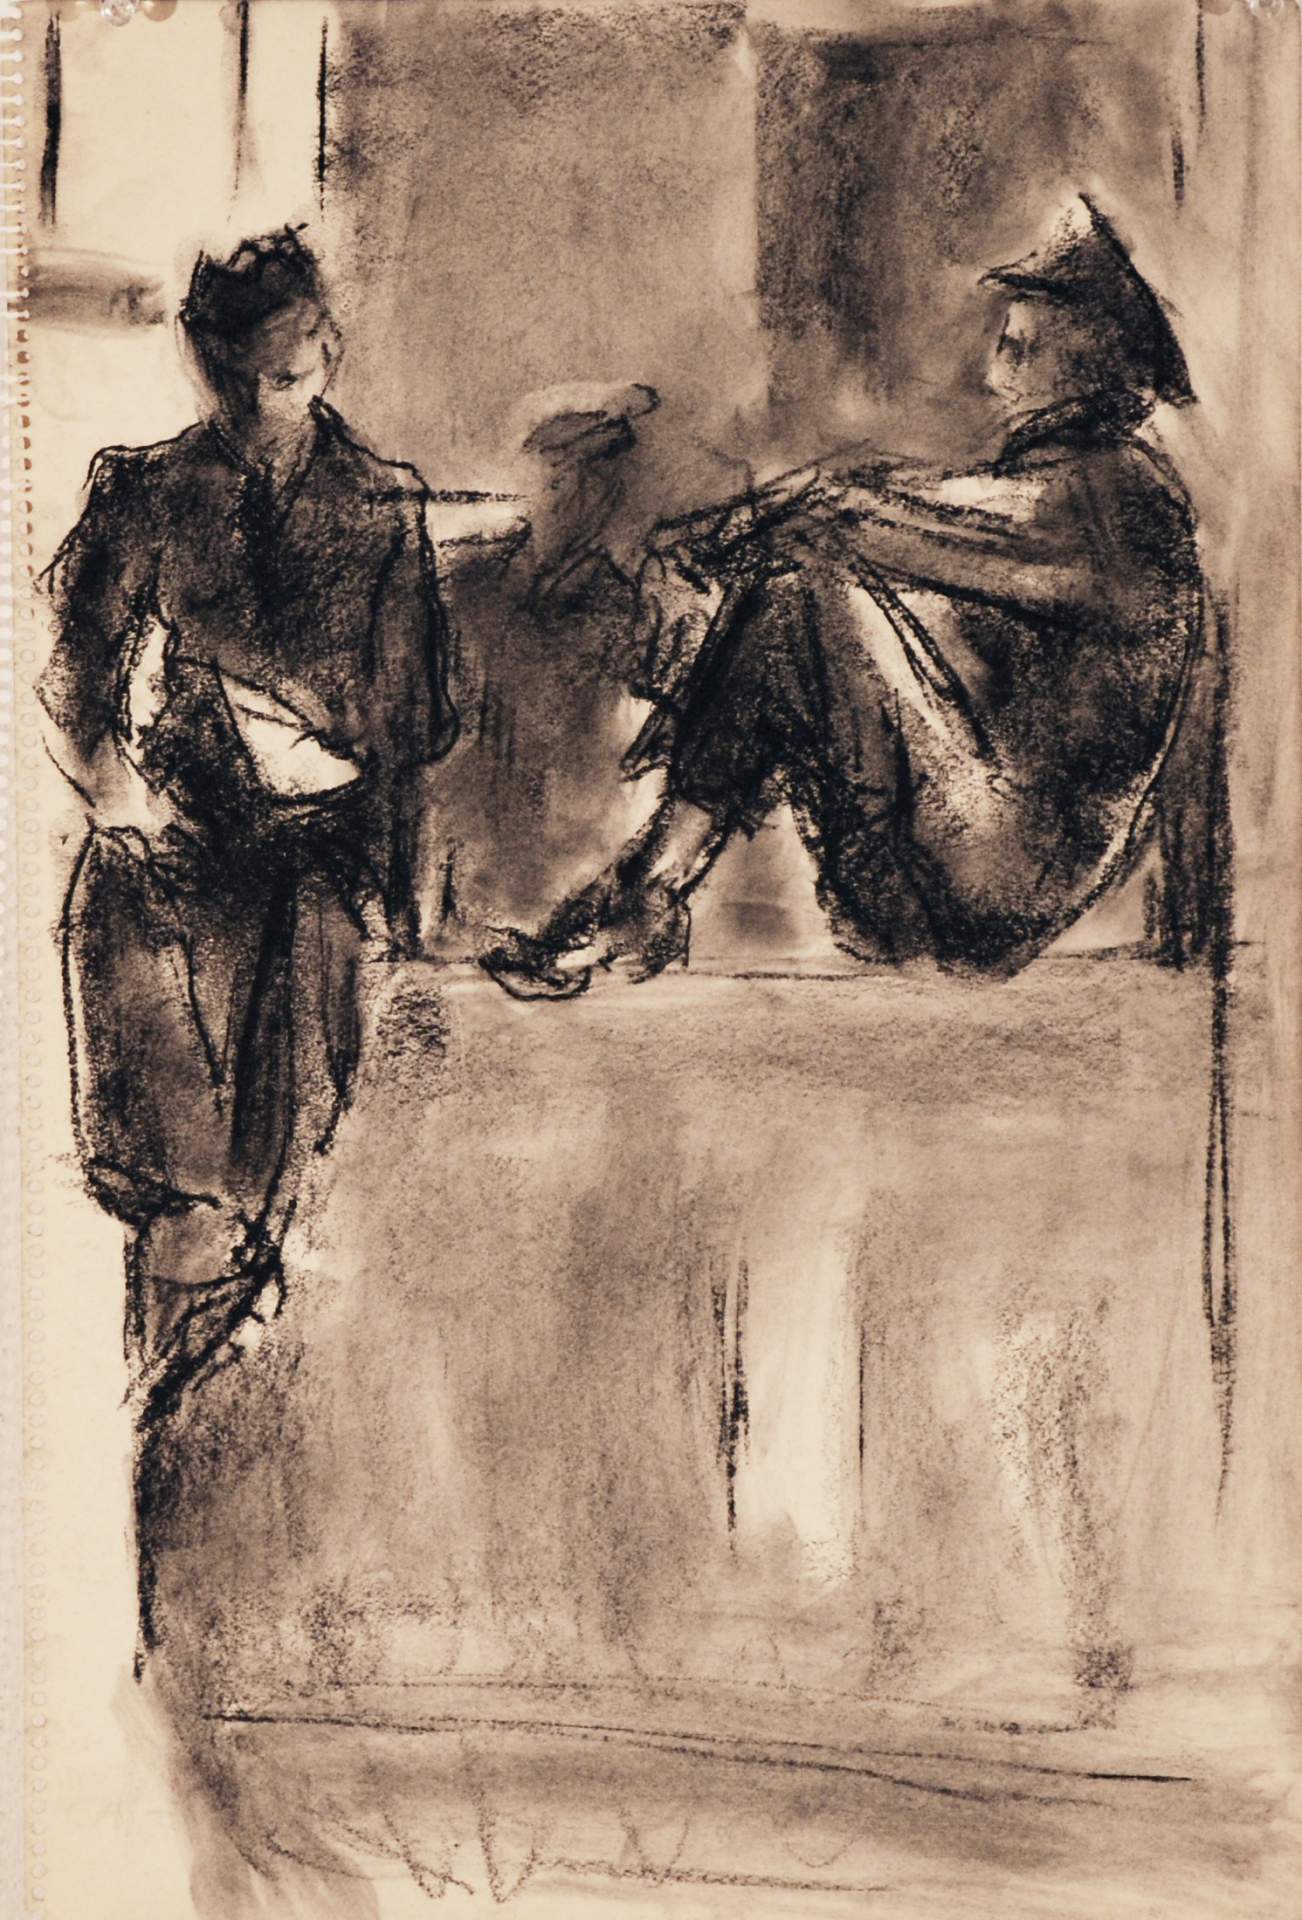 Untitled [two figures in uniform]